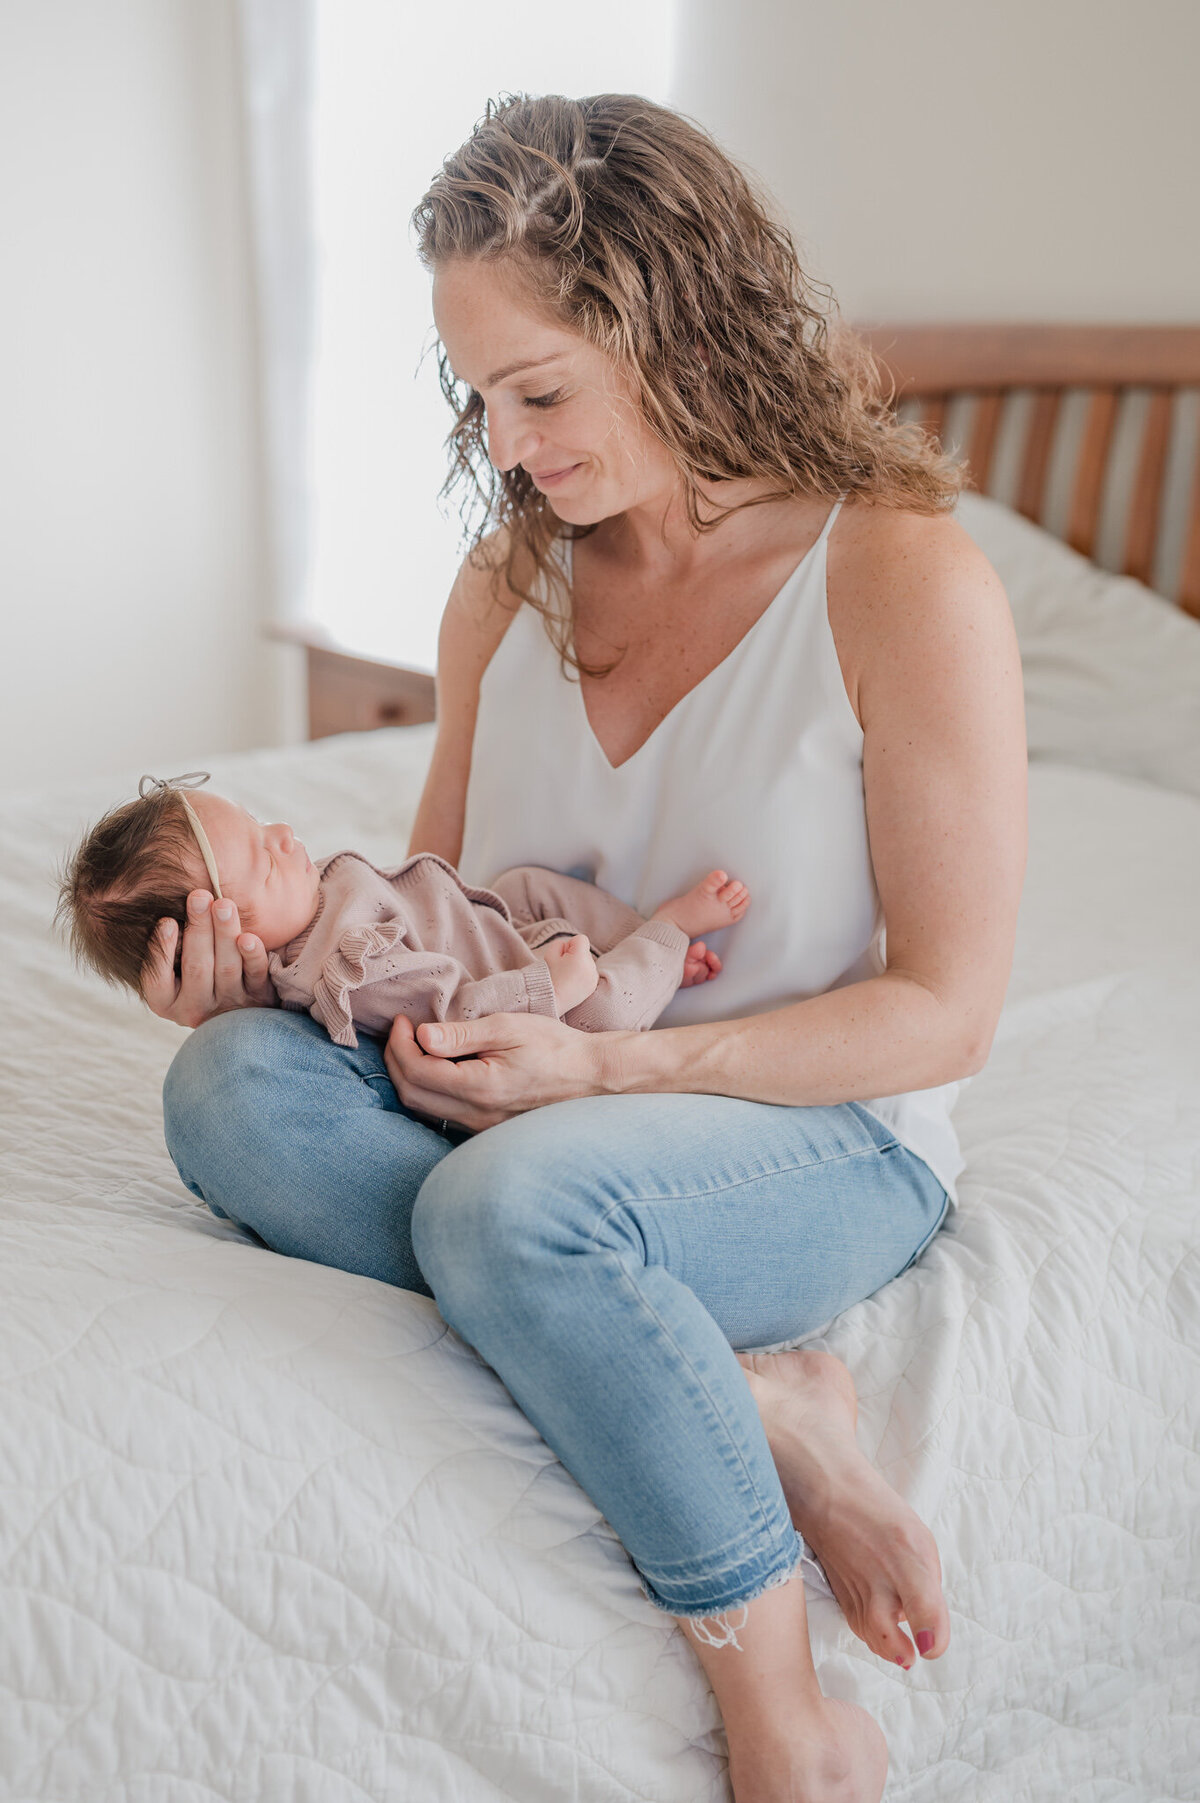 Mom sits on her bed and gazes down at her baby on her lap during lifestyle newborn pictures.